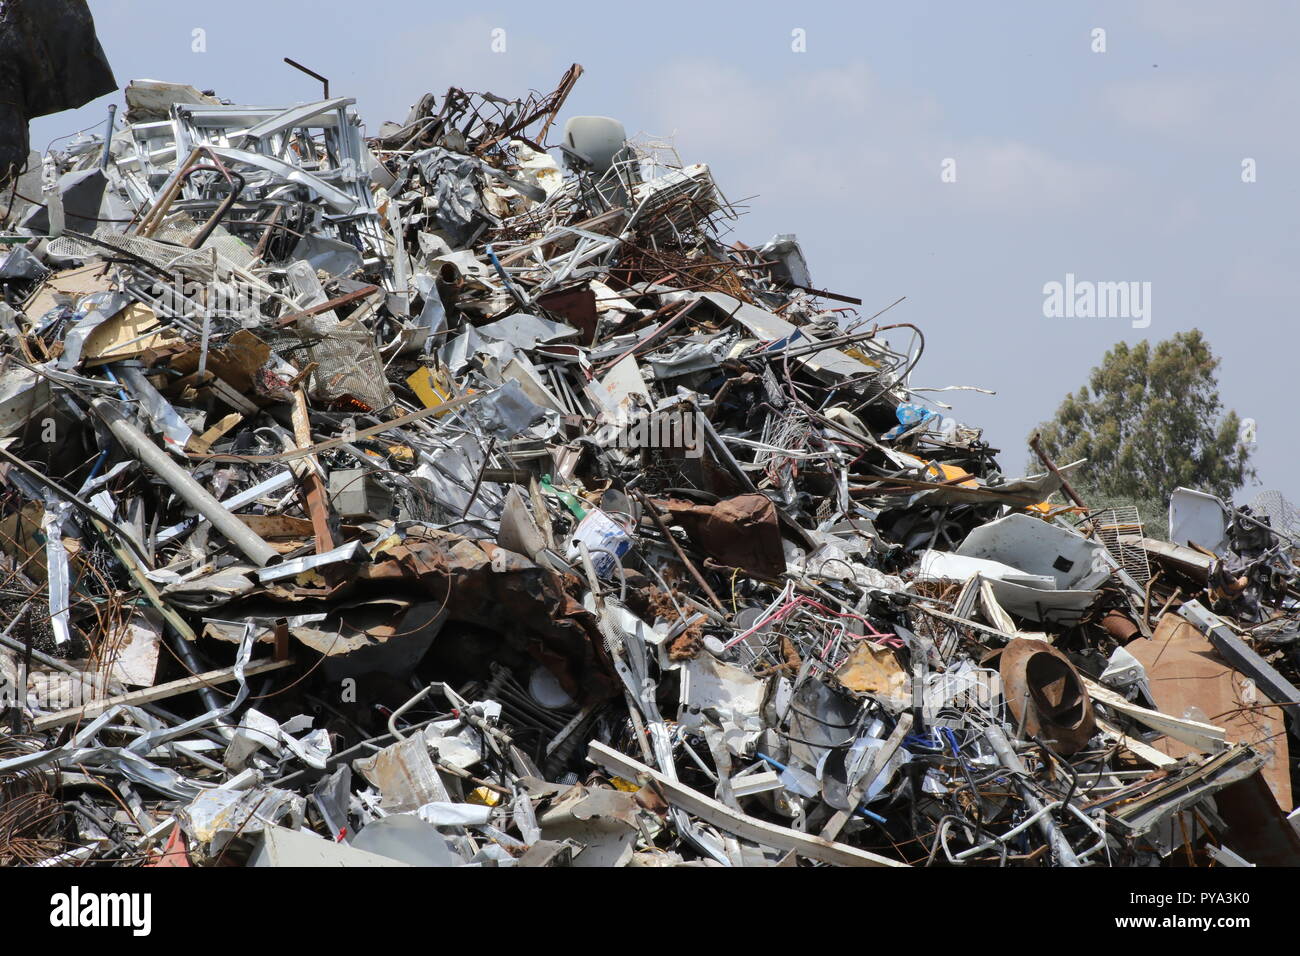 Metal waste, metal Recycling. Pile of metal waste, Metal Recycling with a tree in the background. Stock Photo